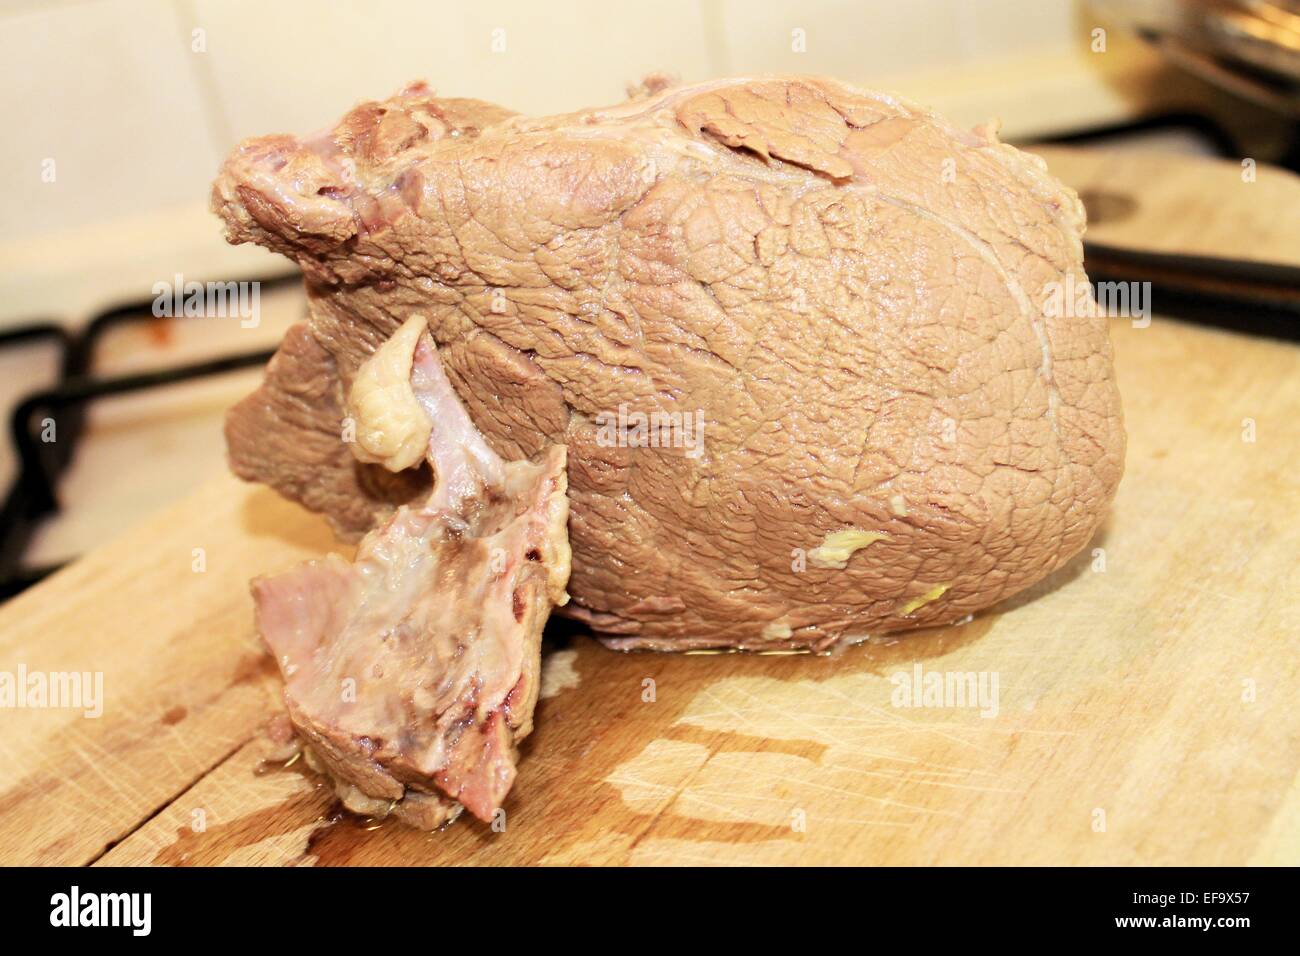 boiled beef on wooden cutting board Stock Photo